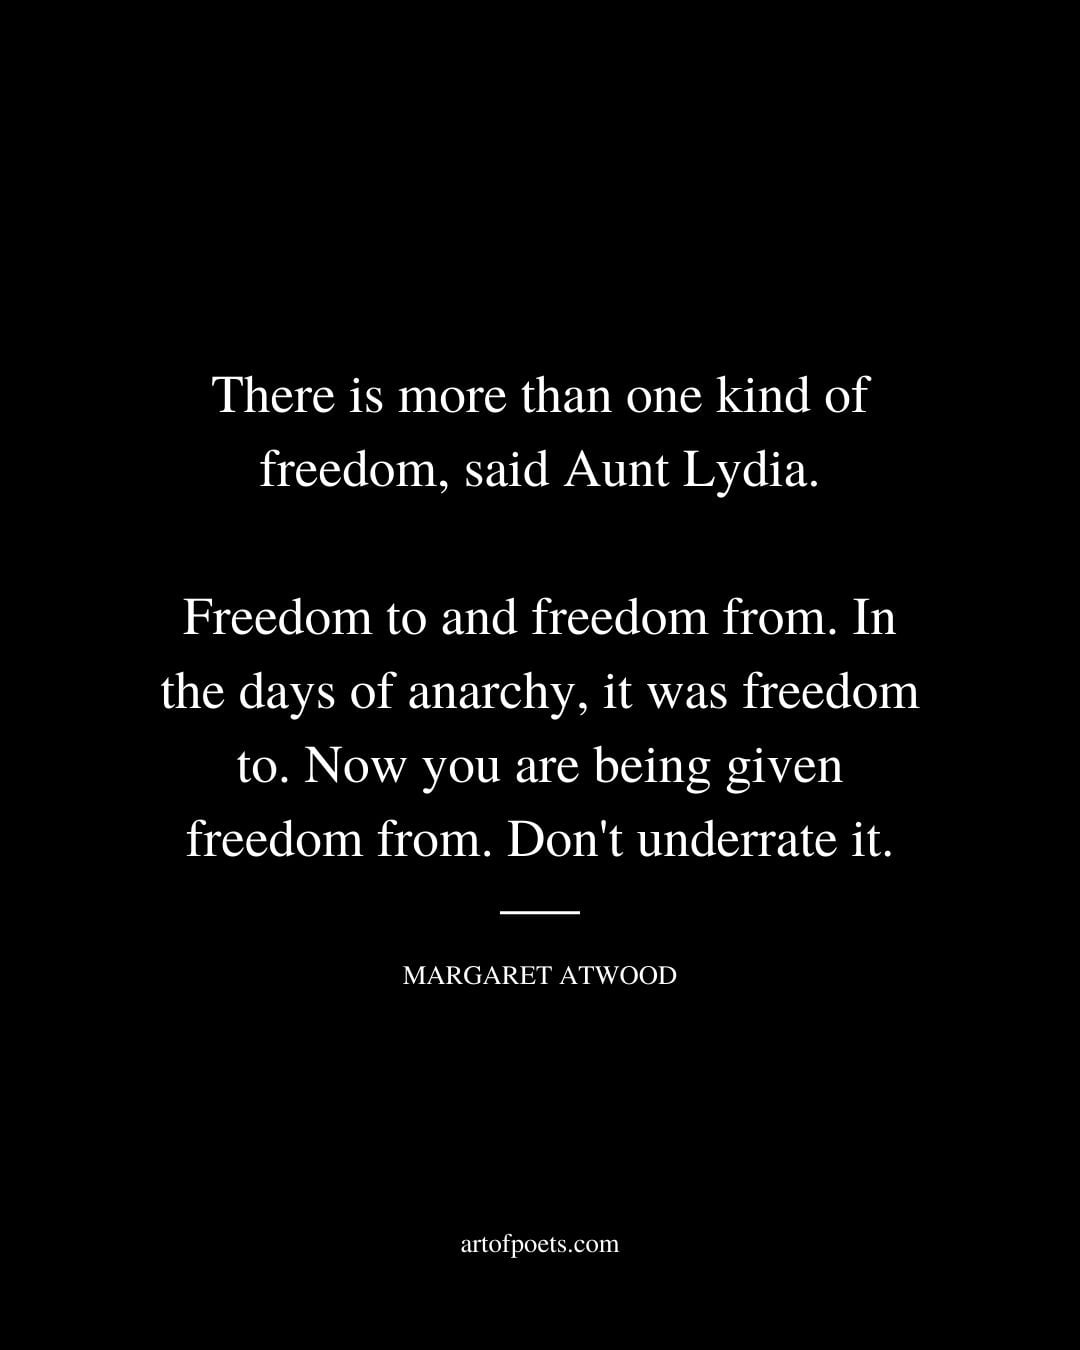 There is more than one kind of freedom said Aunt Lydia. Freedom to and freedom from. In the days of anarchy it was freedom to. Now you are being given freedom from. Dont underrate it. Margaret Atwood